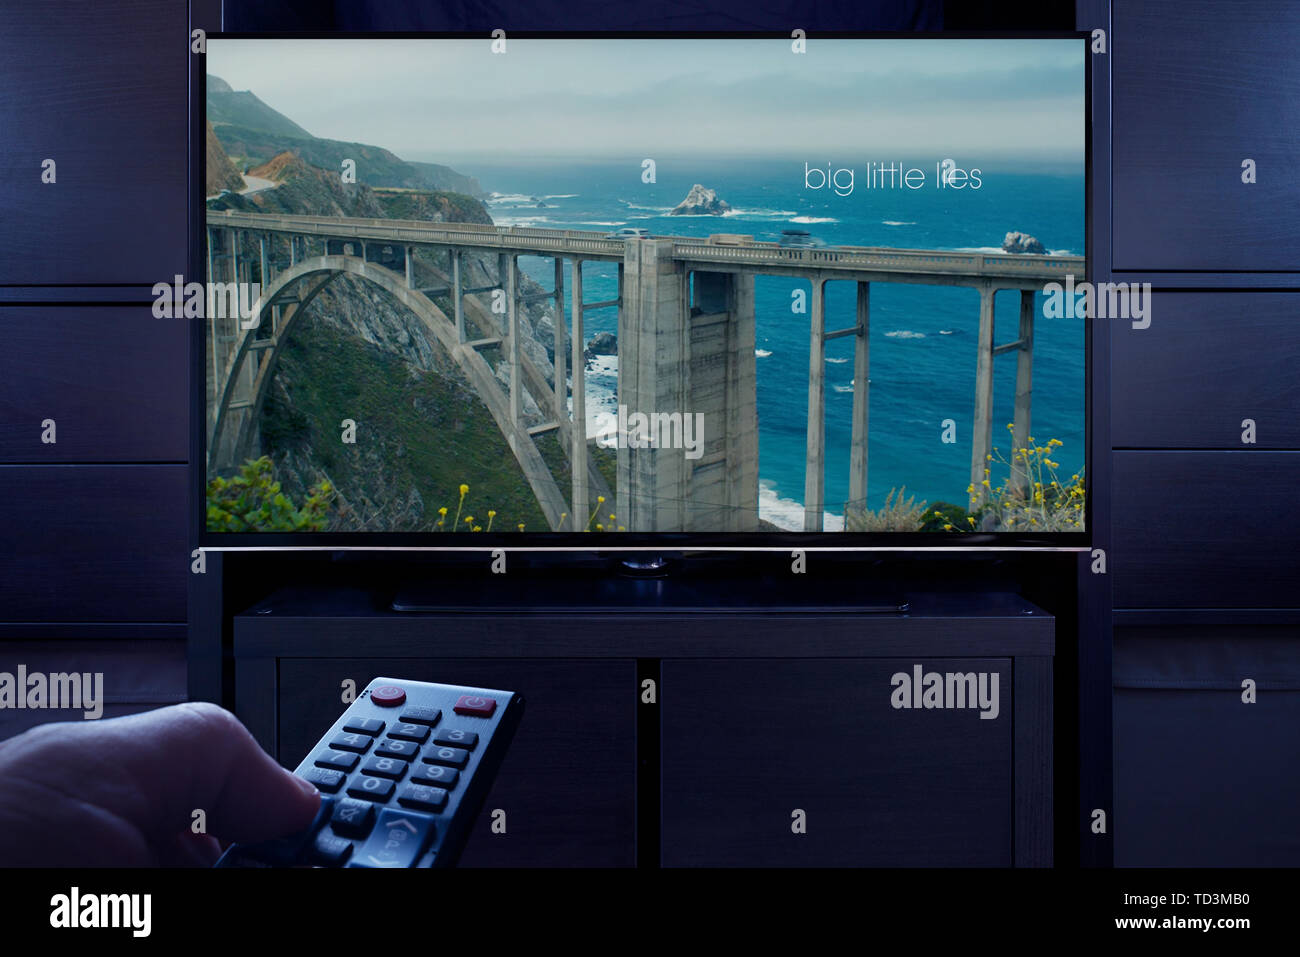 A man points a TV remote at the television which displays the Big Little Lies main title screen (Editorial use only). Stock Photo